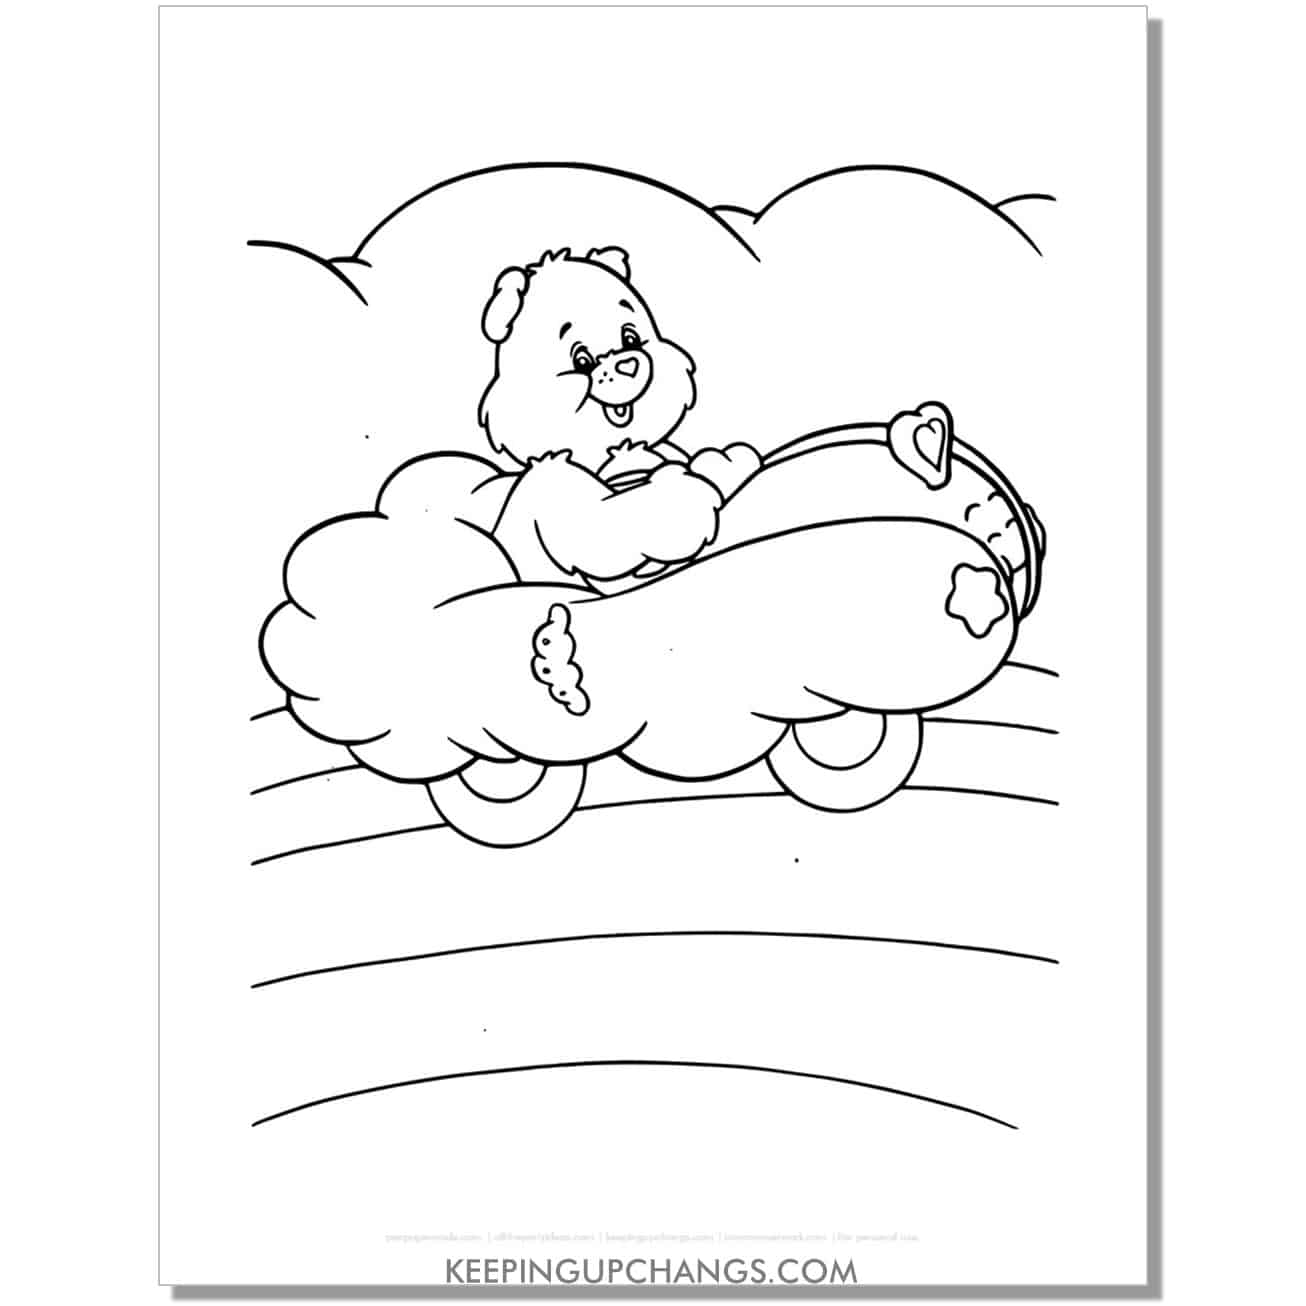 care bear in car care bear coloring page, sheet.